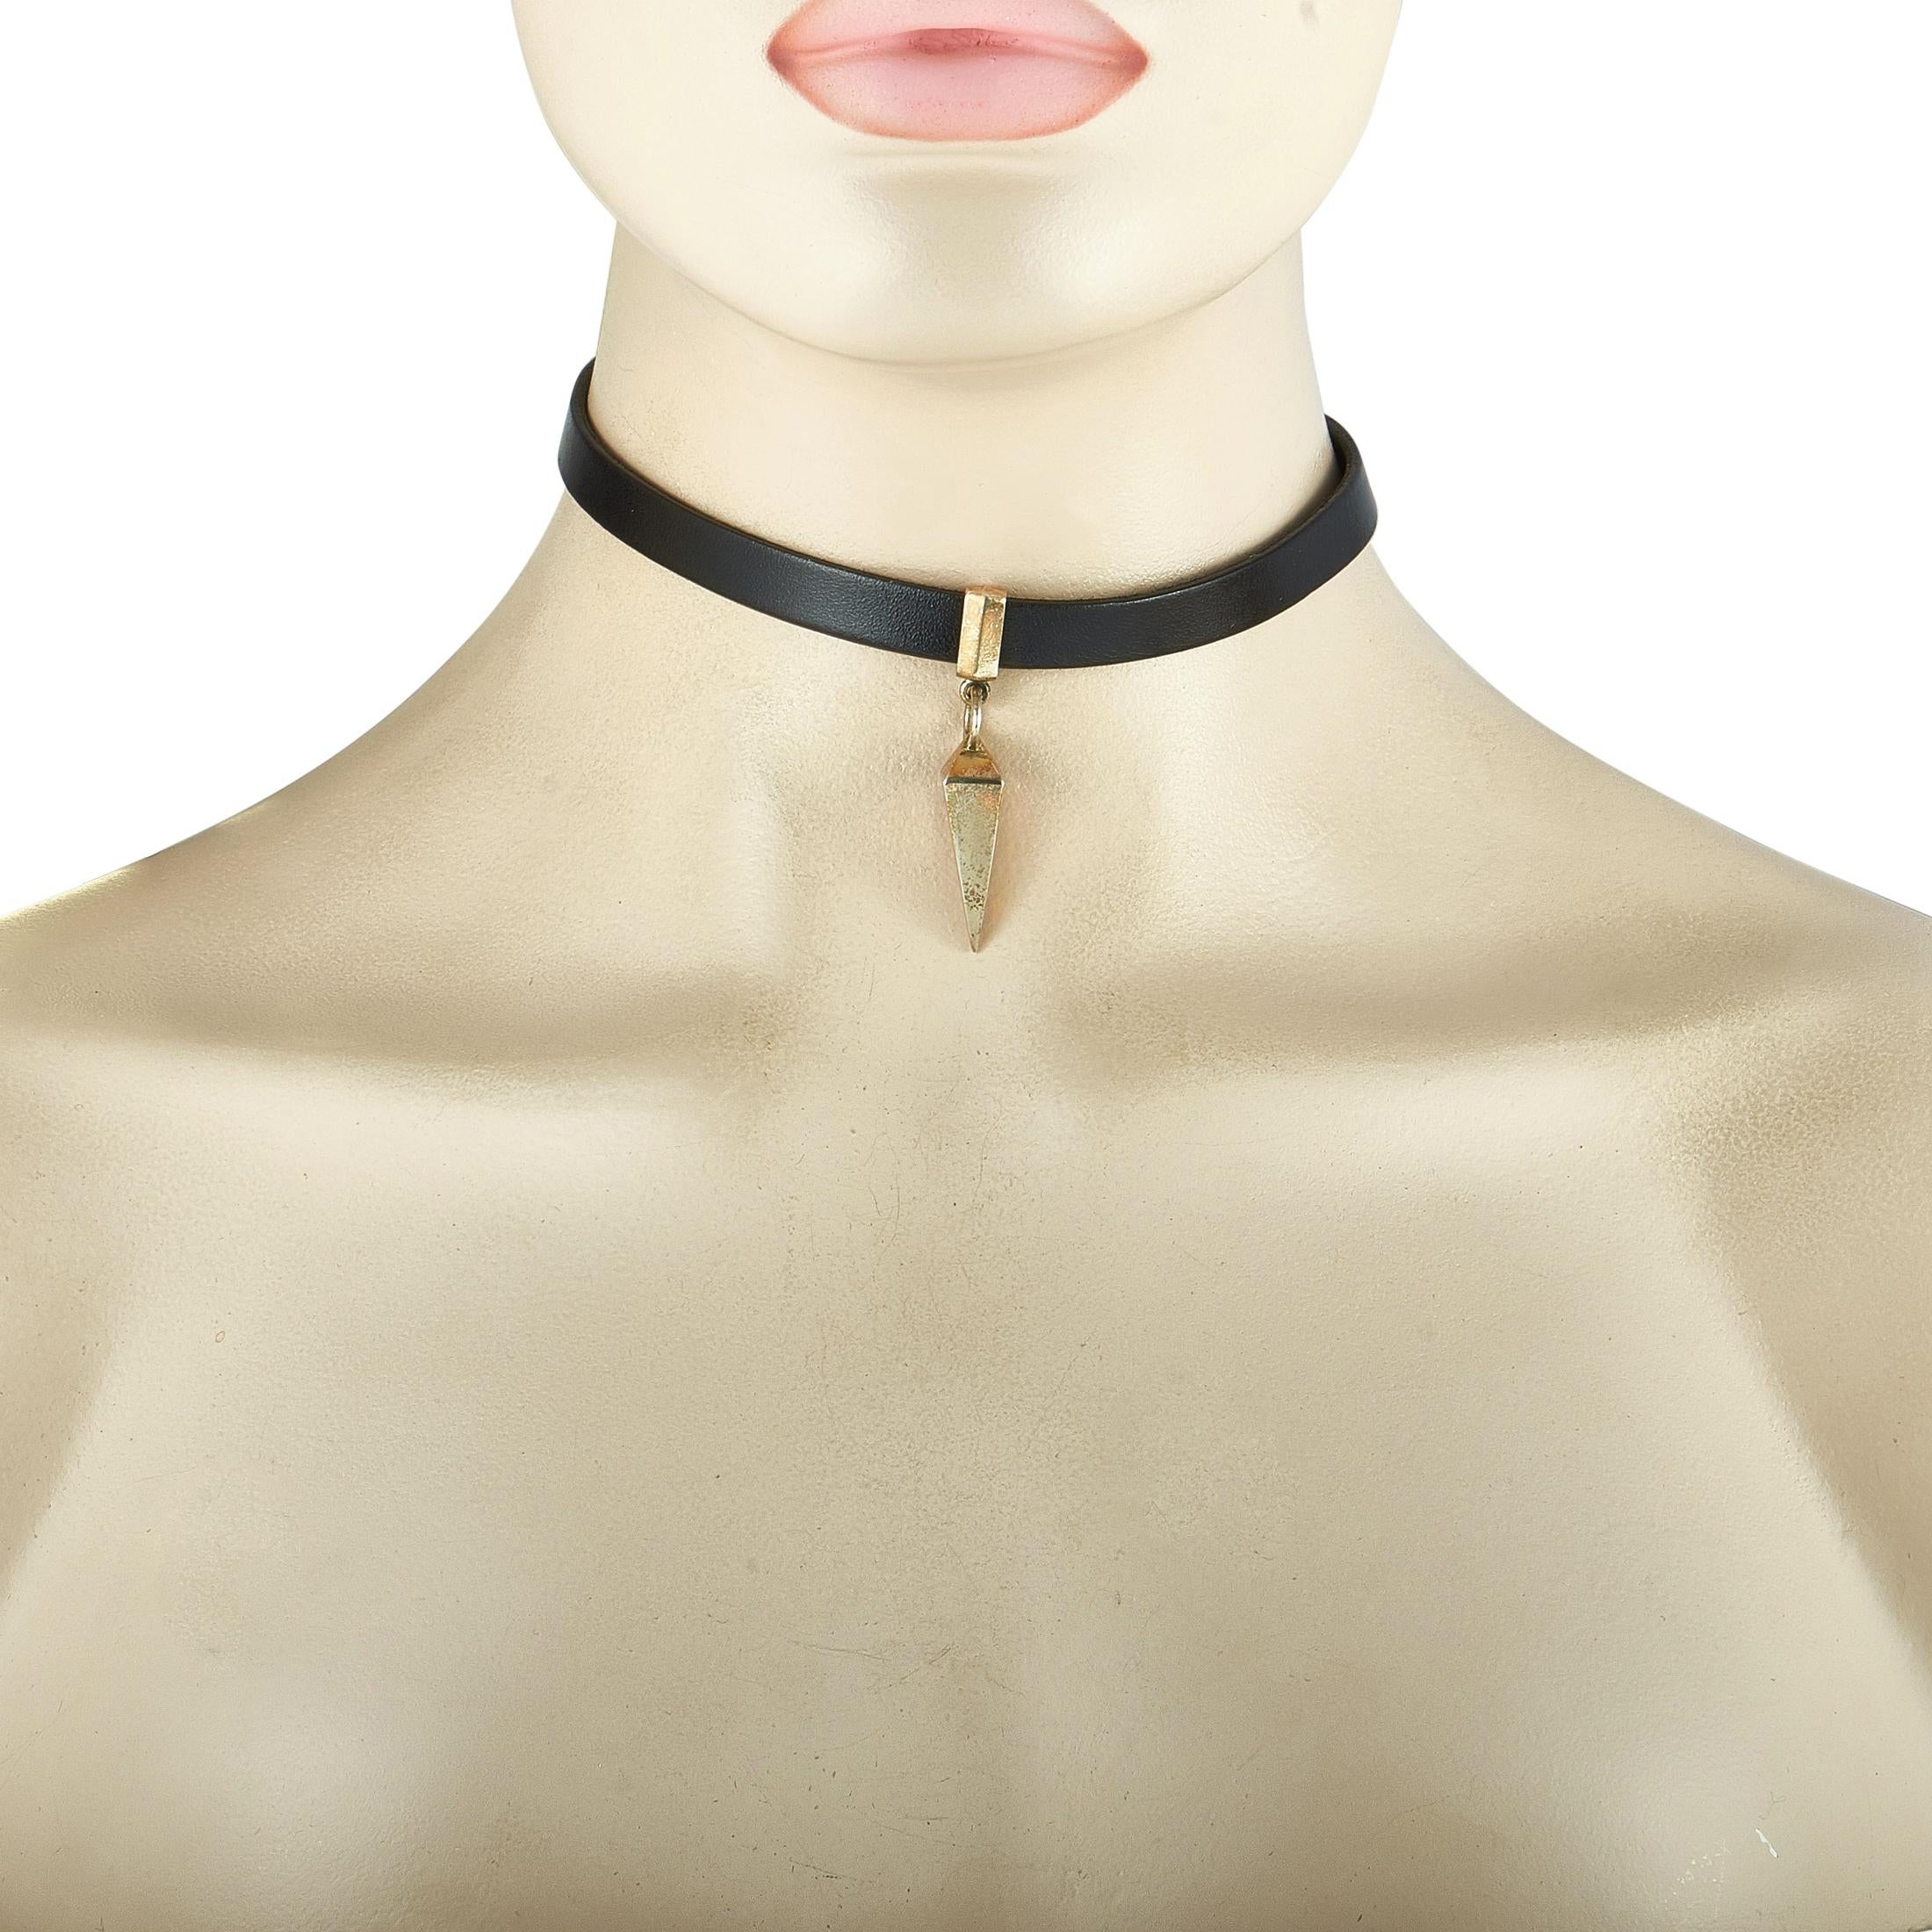 This King Baby choker necklace is made out of sterling silver and black leather. It weighs 27.2 grams and measures 12” in length, while the pendant measures 1.75” by 0.30”.

Offered in brand new condition, this item includes the manufacturer’s pouch.